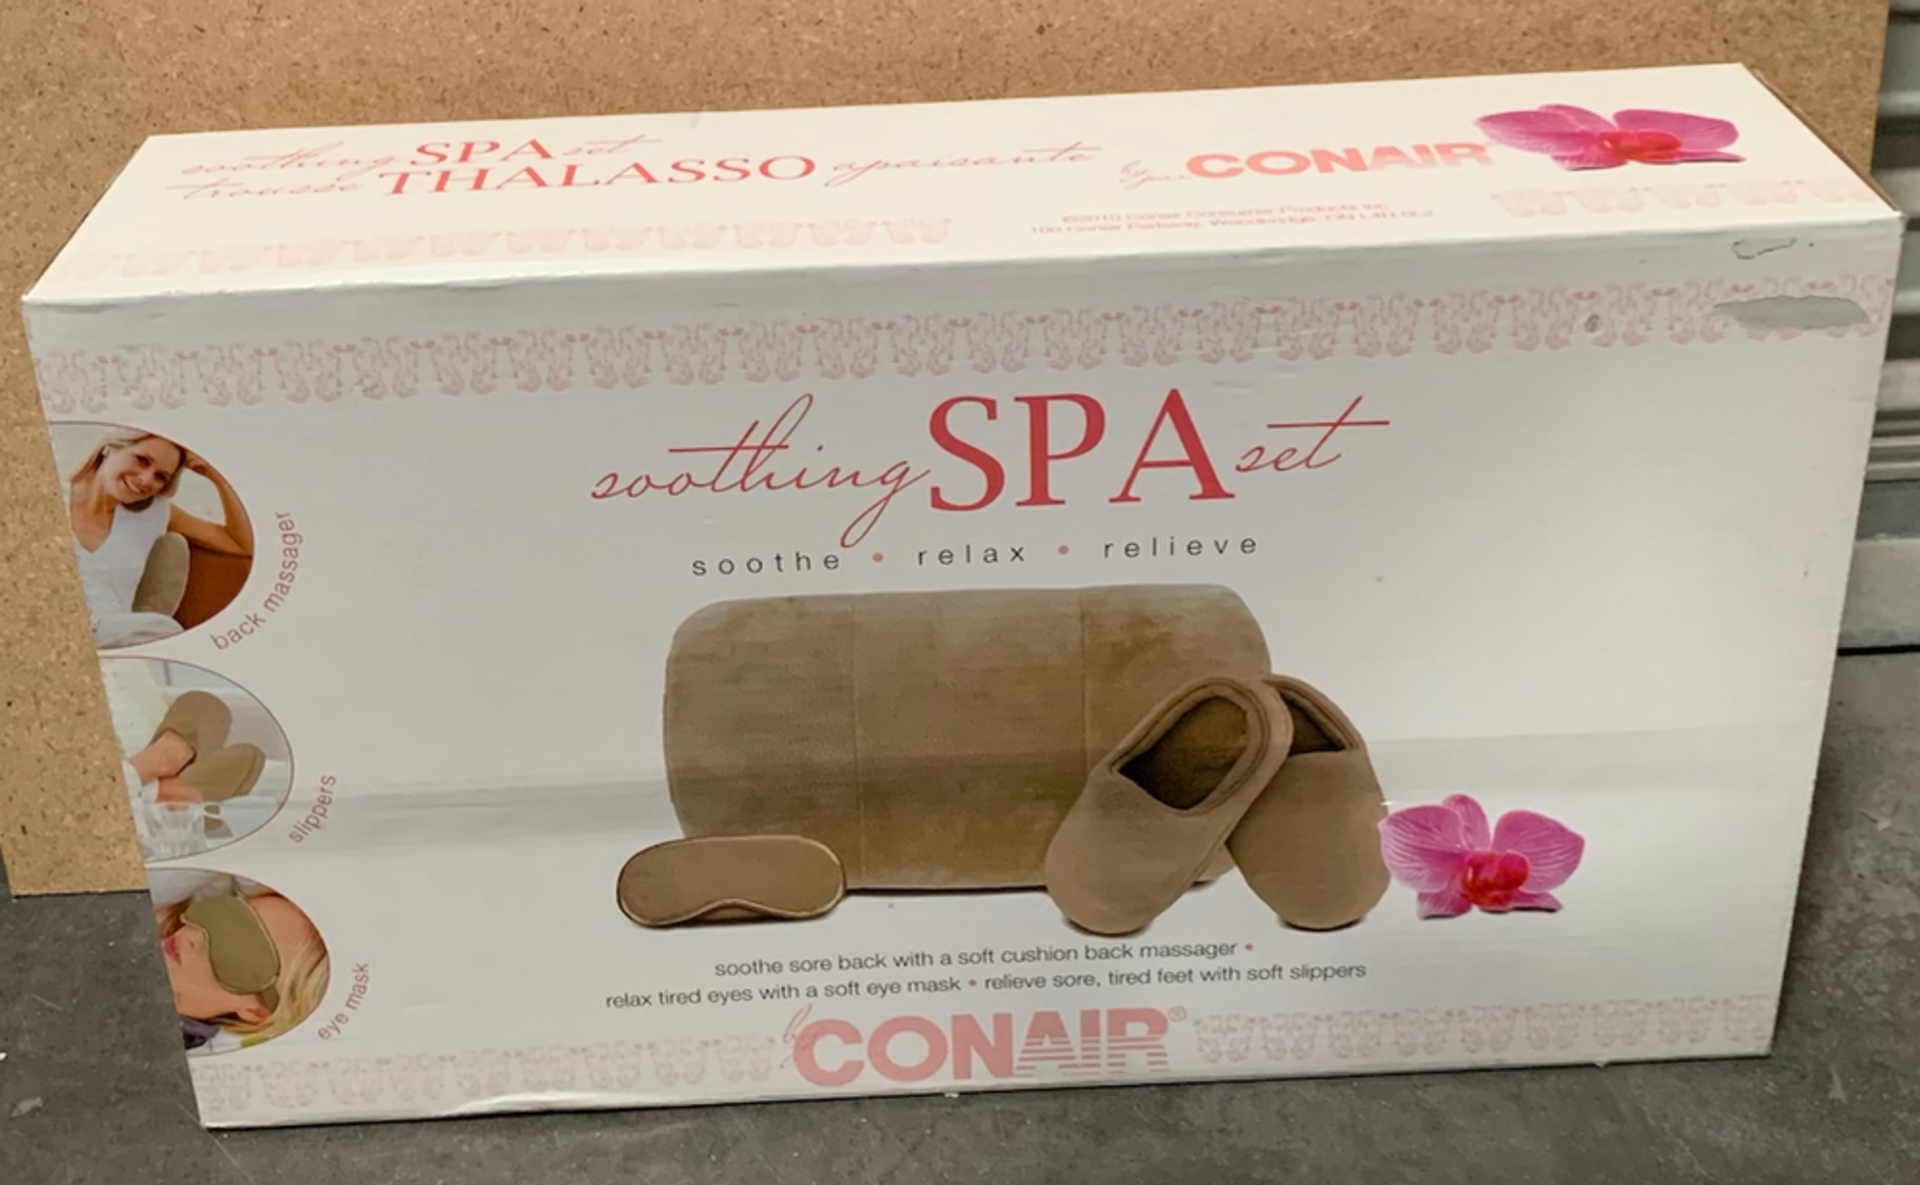 3 Memory Foam Pillows, including Conair Sleeping Set, All in Box - Image 3 of 4